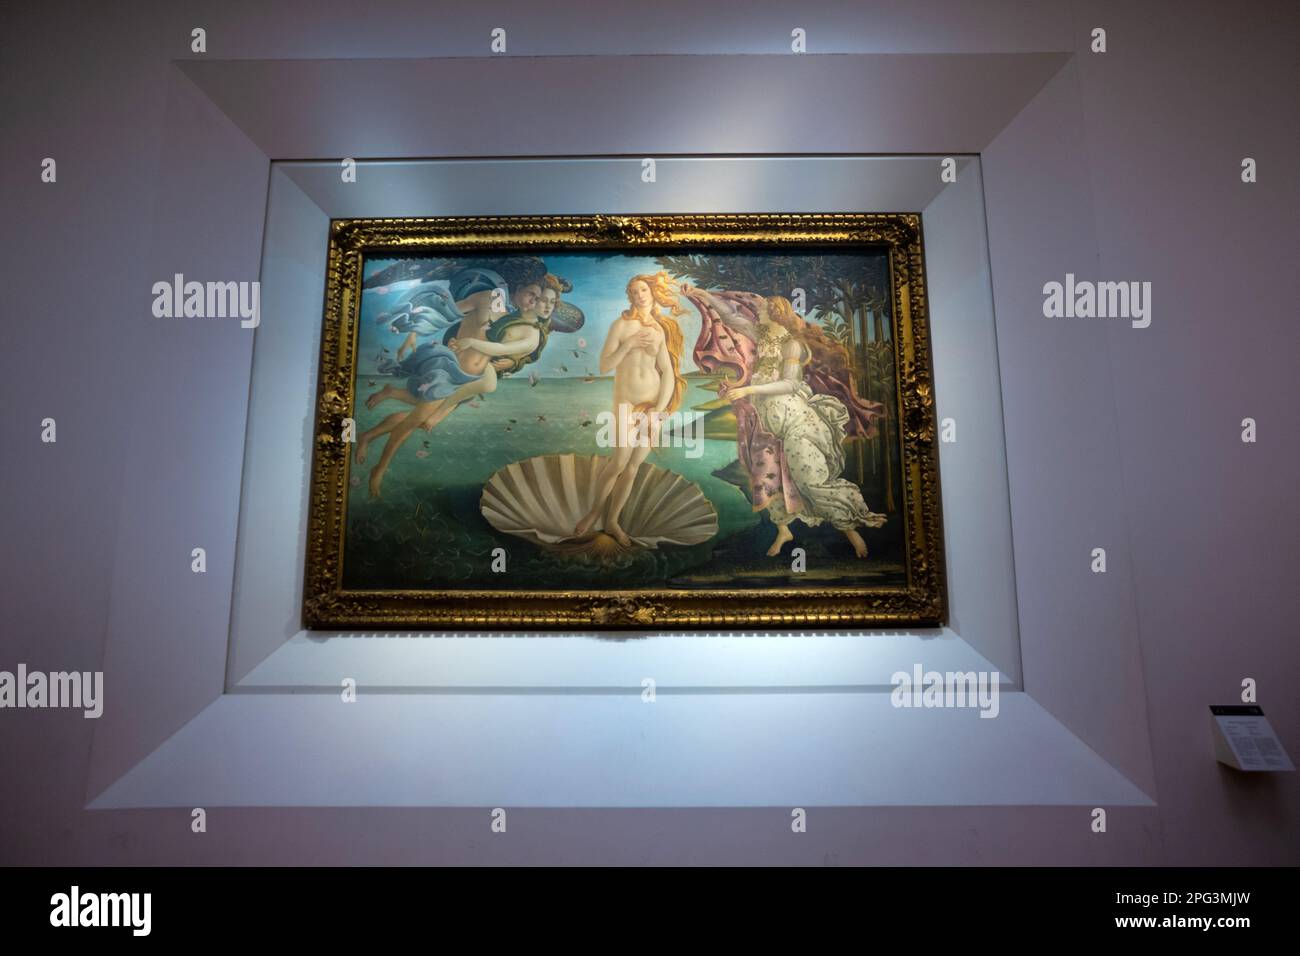 One of the most famous works of art in the world, The Birth of Venus by Sandro Botticelli, on display at the Uffizi art gallery in Florence, Italy Stock Photo